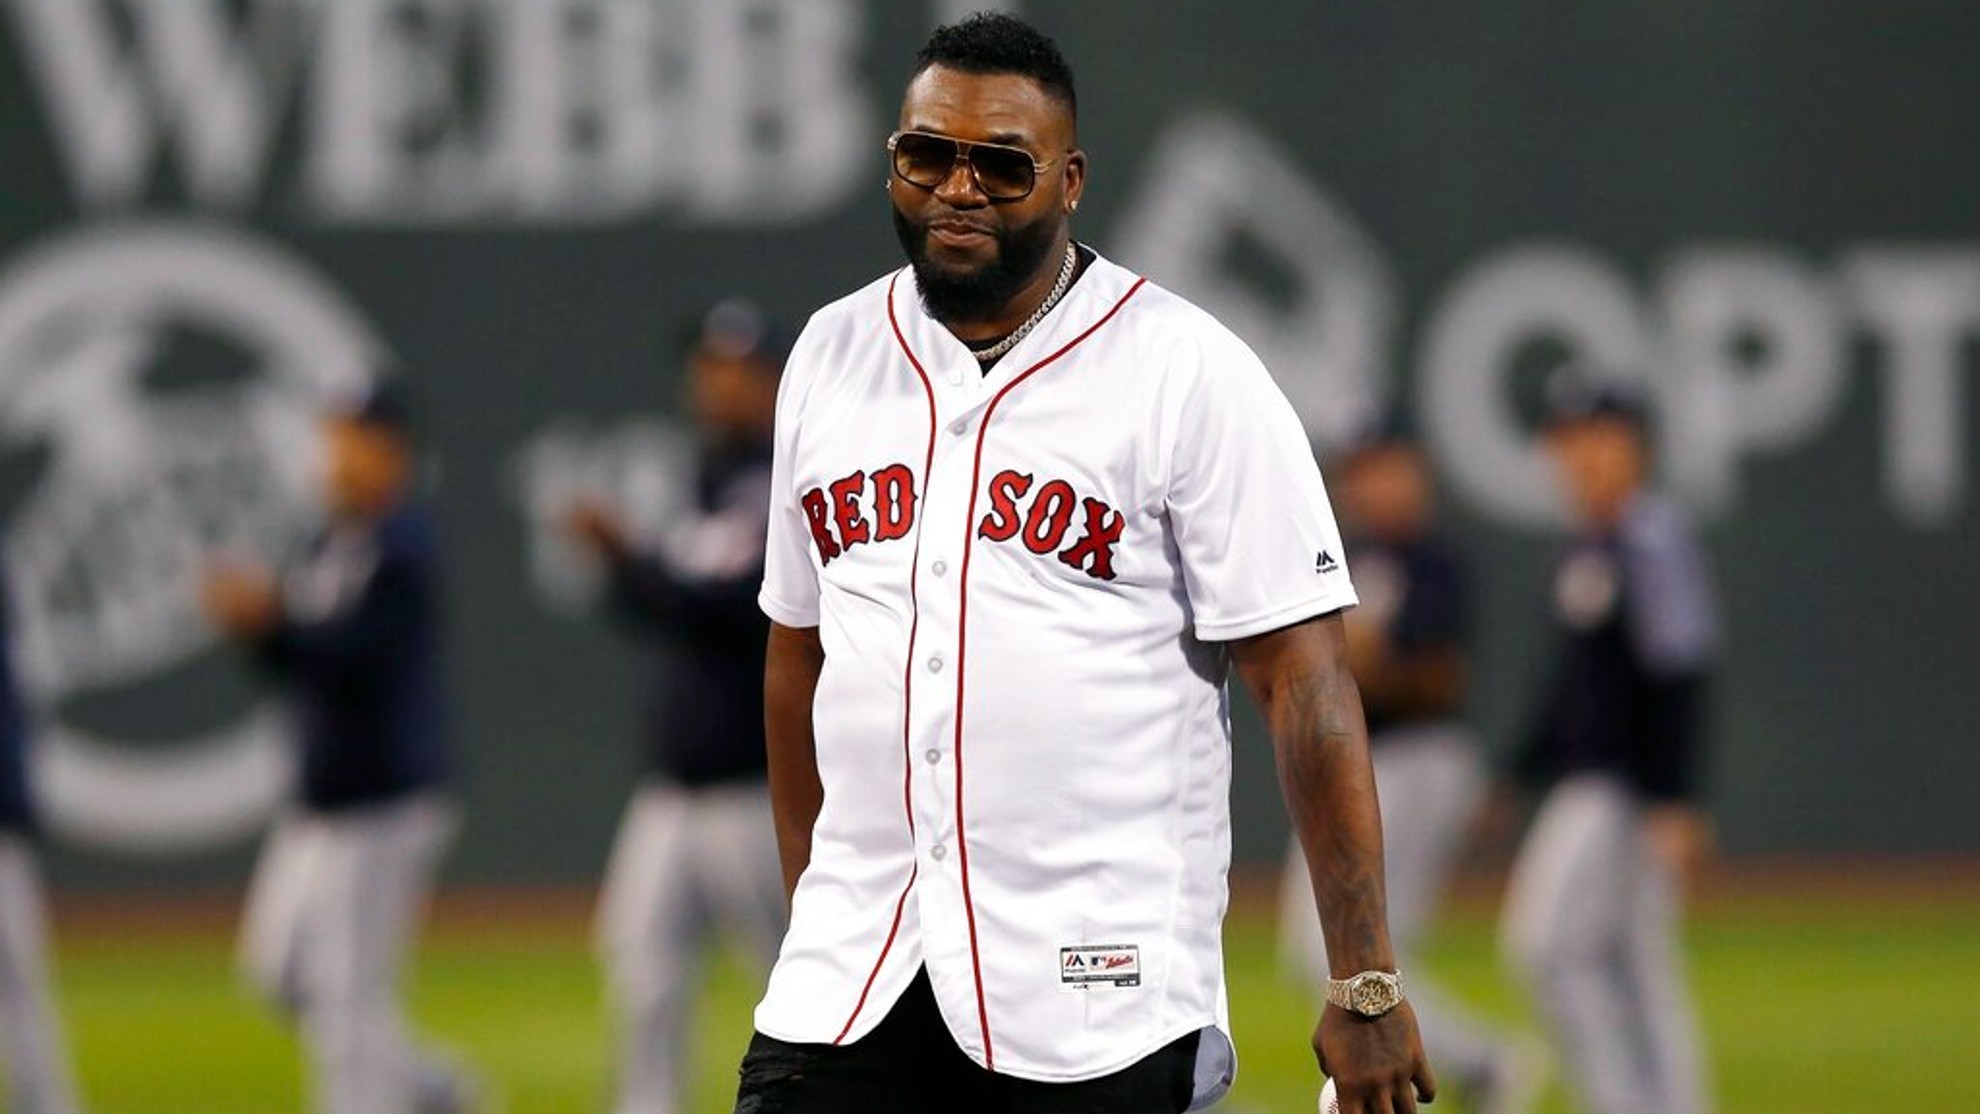 David Ortiz case: investigation of the attack reveals that a drug lord would have ordered his murder